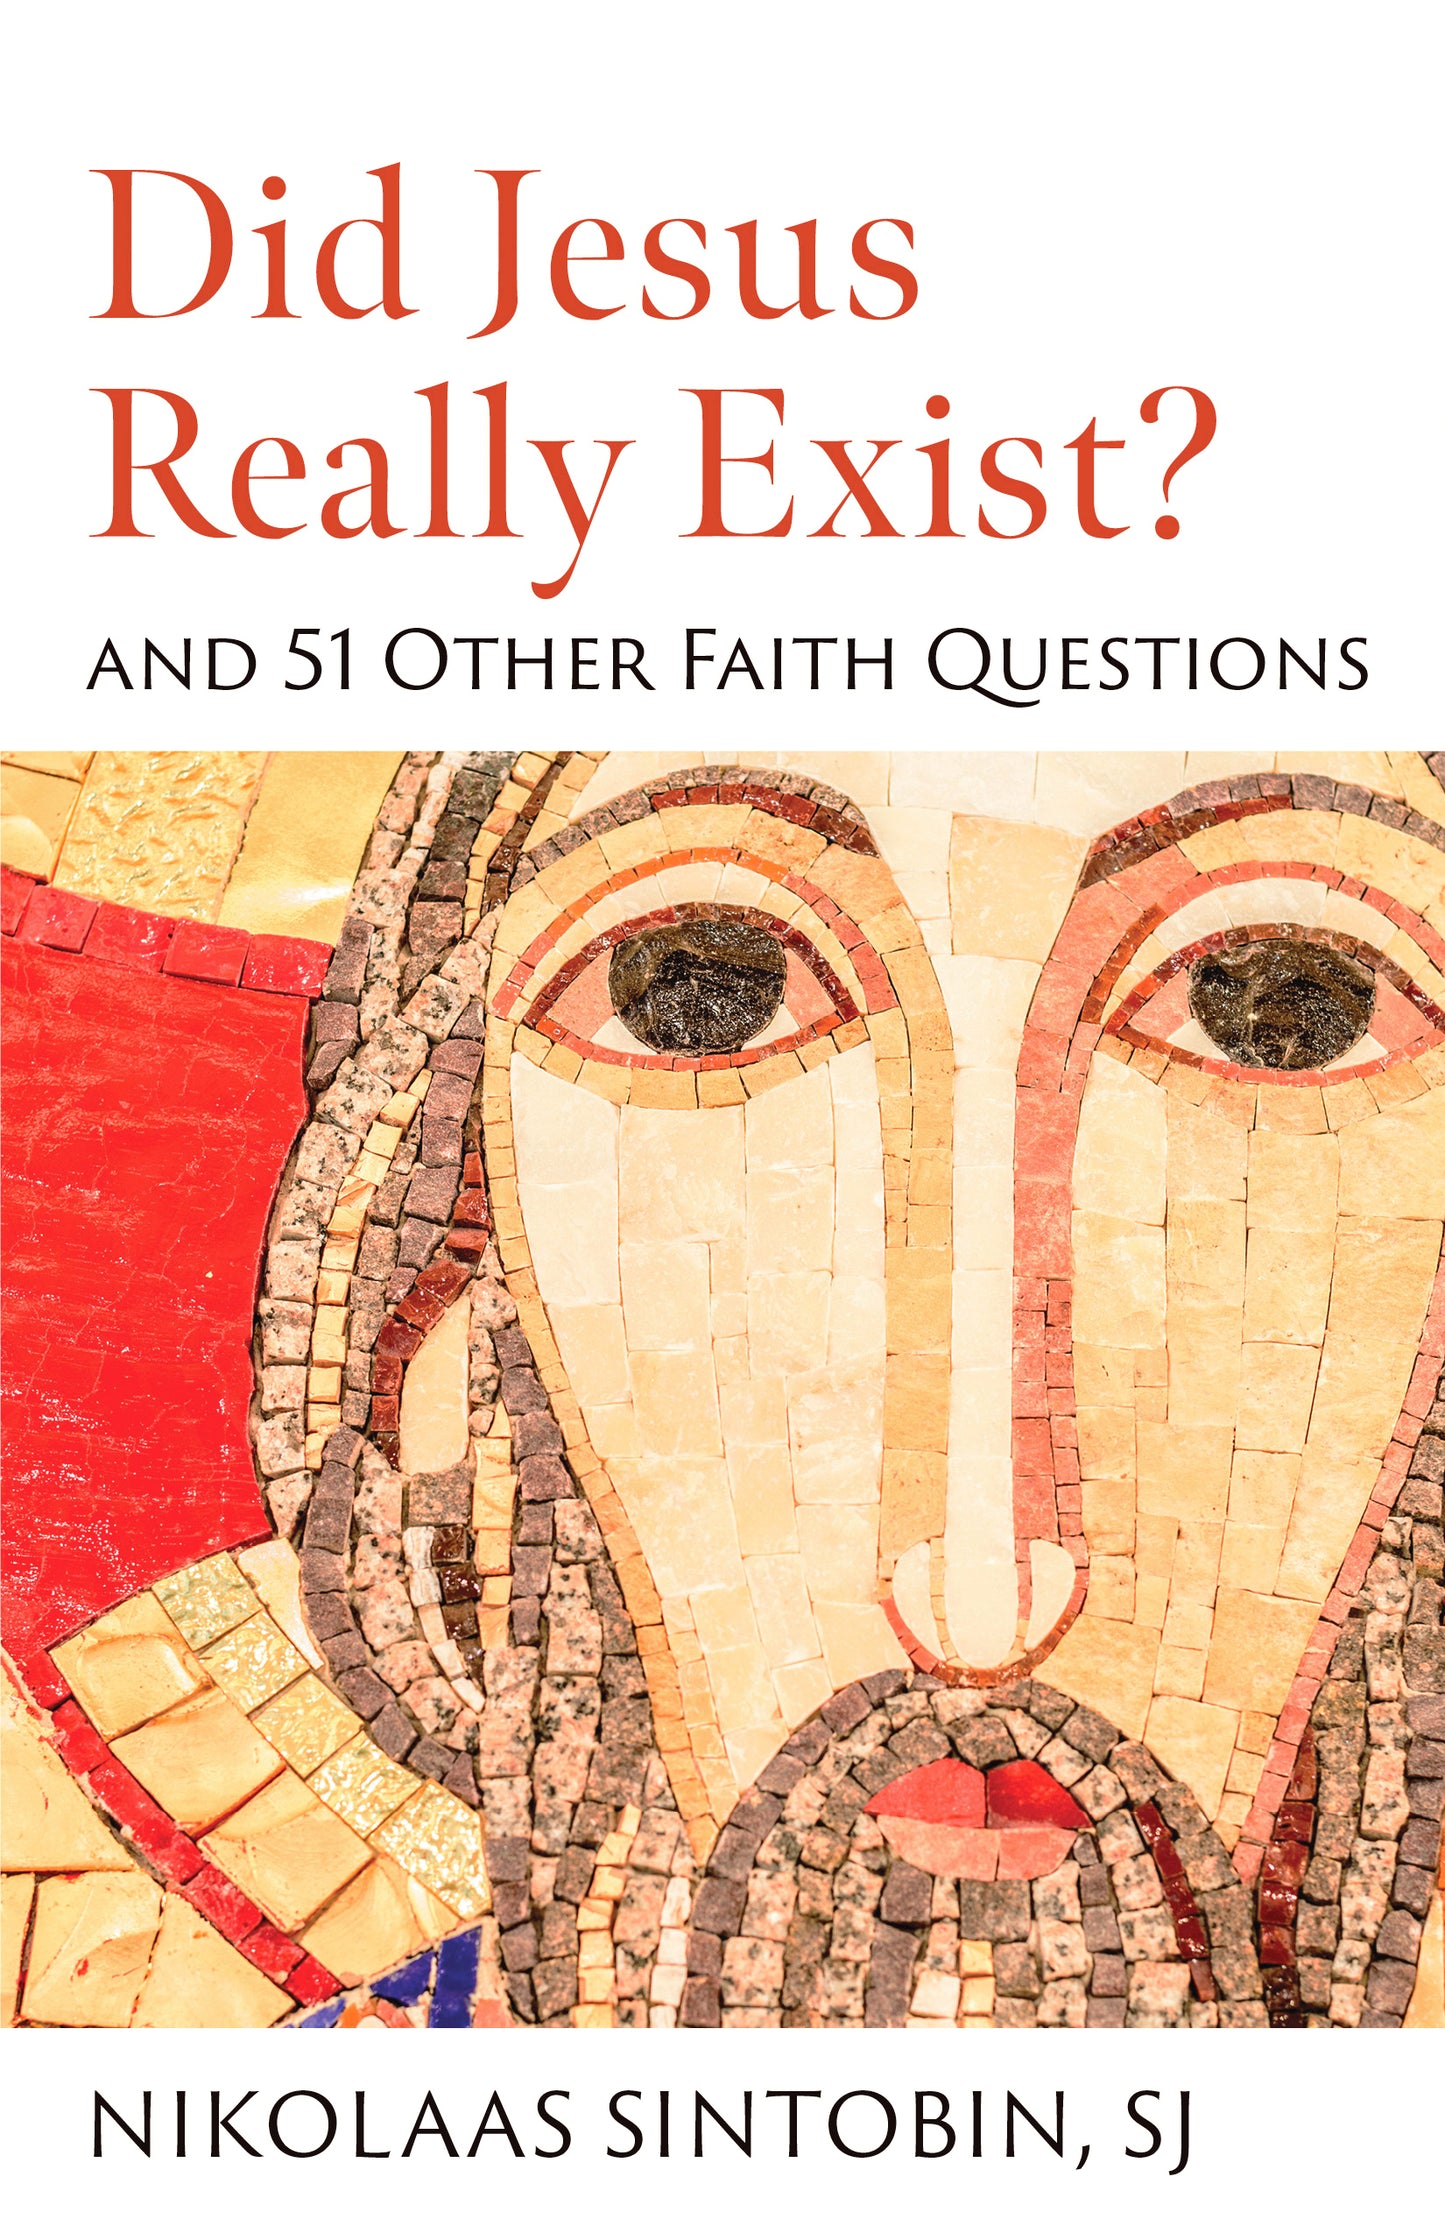 SALE - Did Jesus Really Exist? and 51 Other Faith Questions